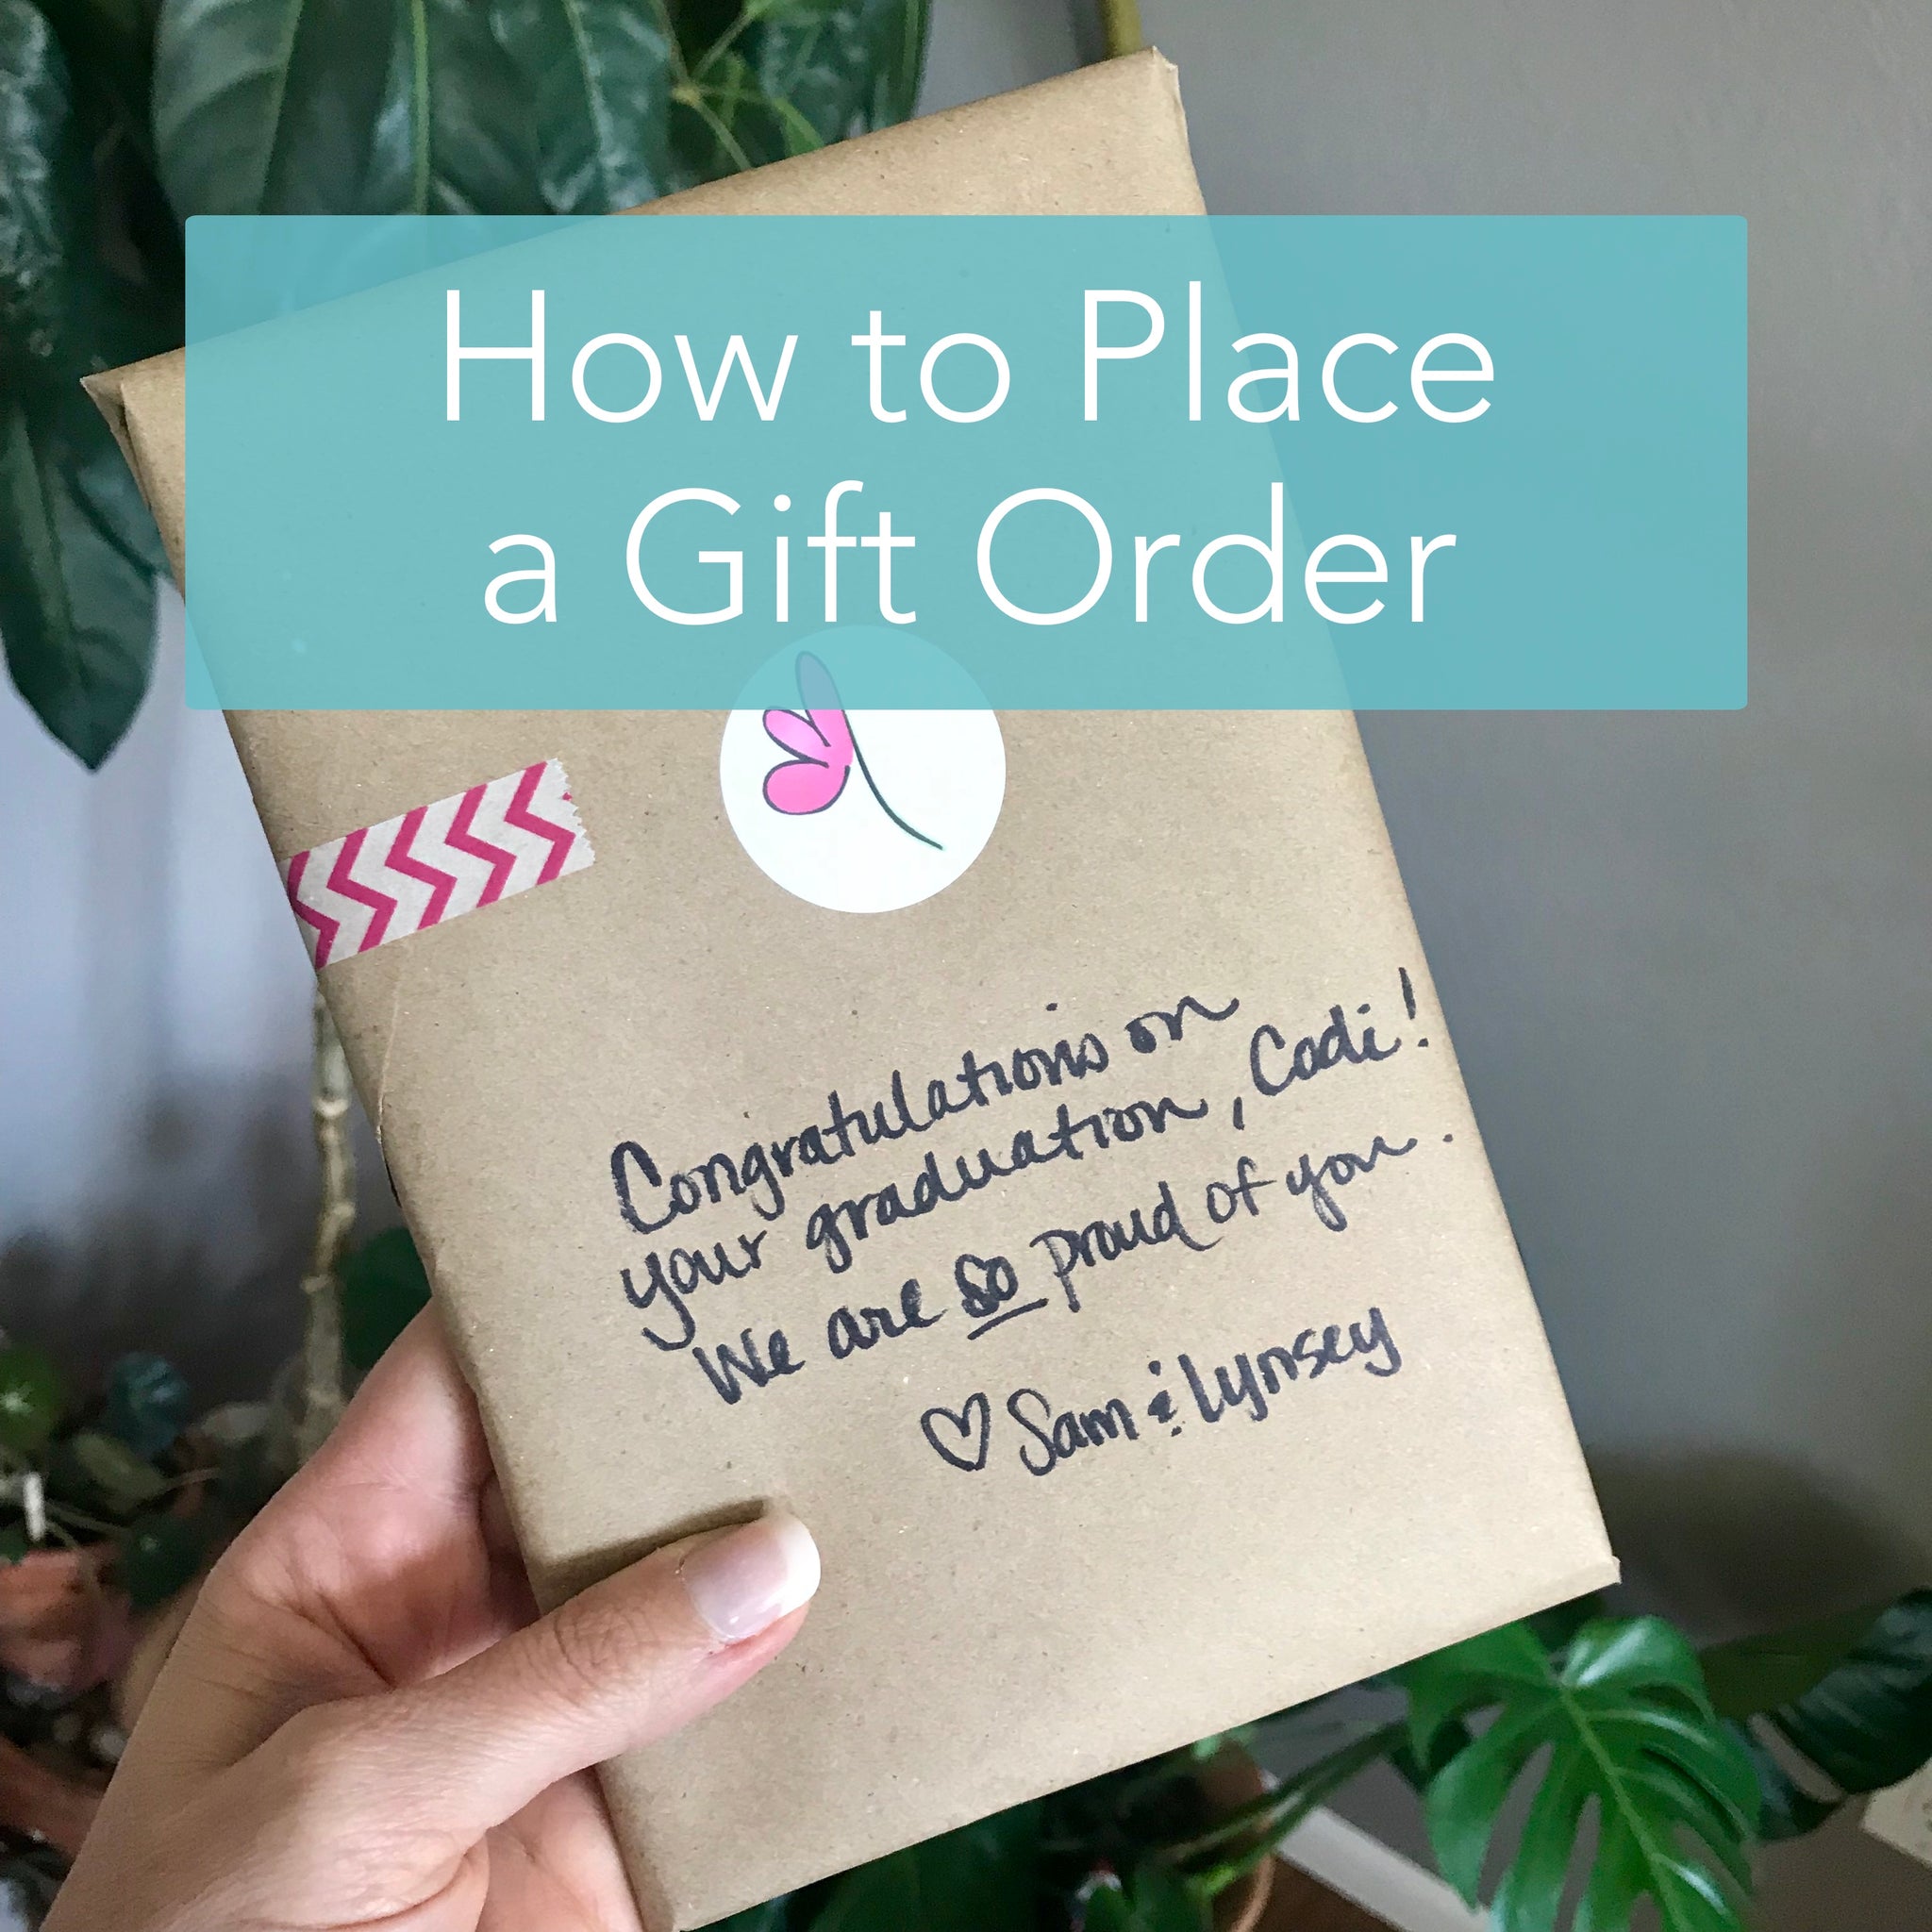 How to Place a Gift Order